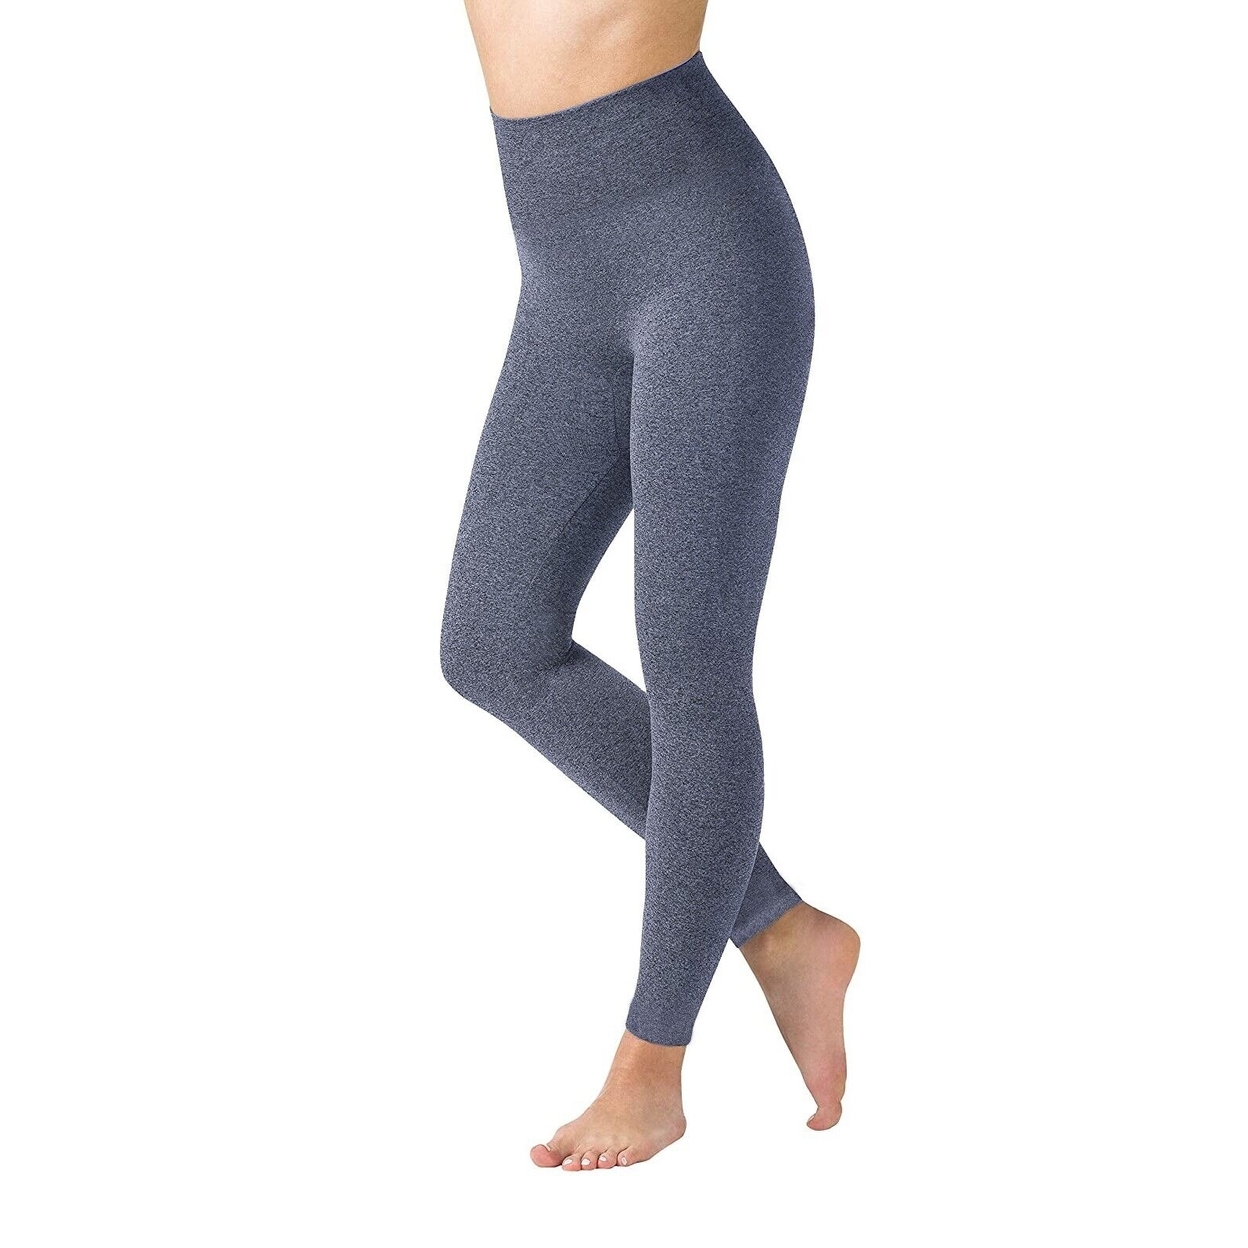 Multi-Packs Women High Waisted Fleece Lined Marled Leggings Ultra Soft Warm Pant - Charcoal, 1, Small